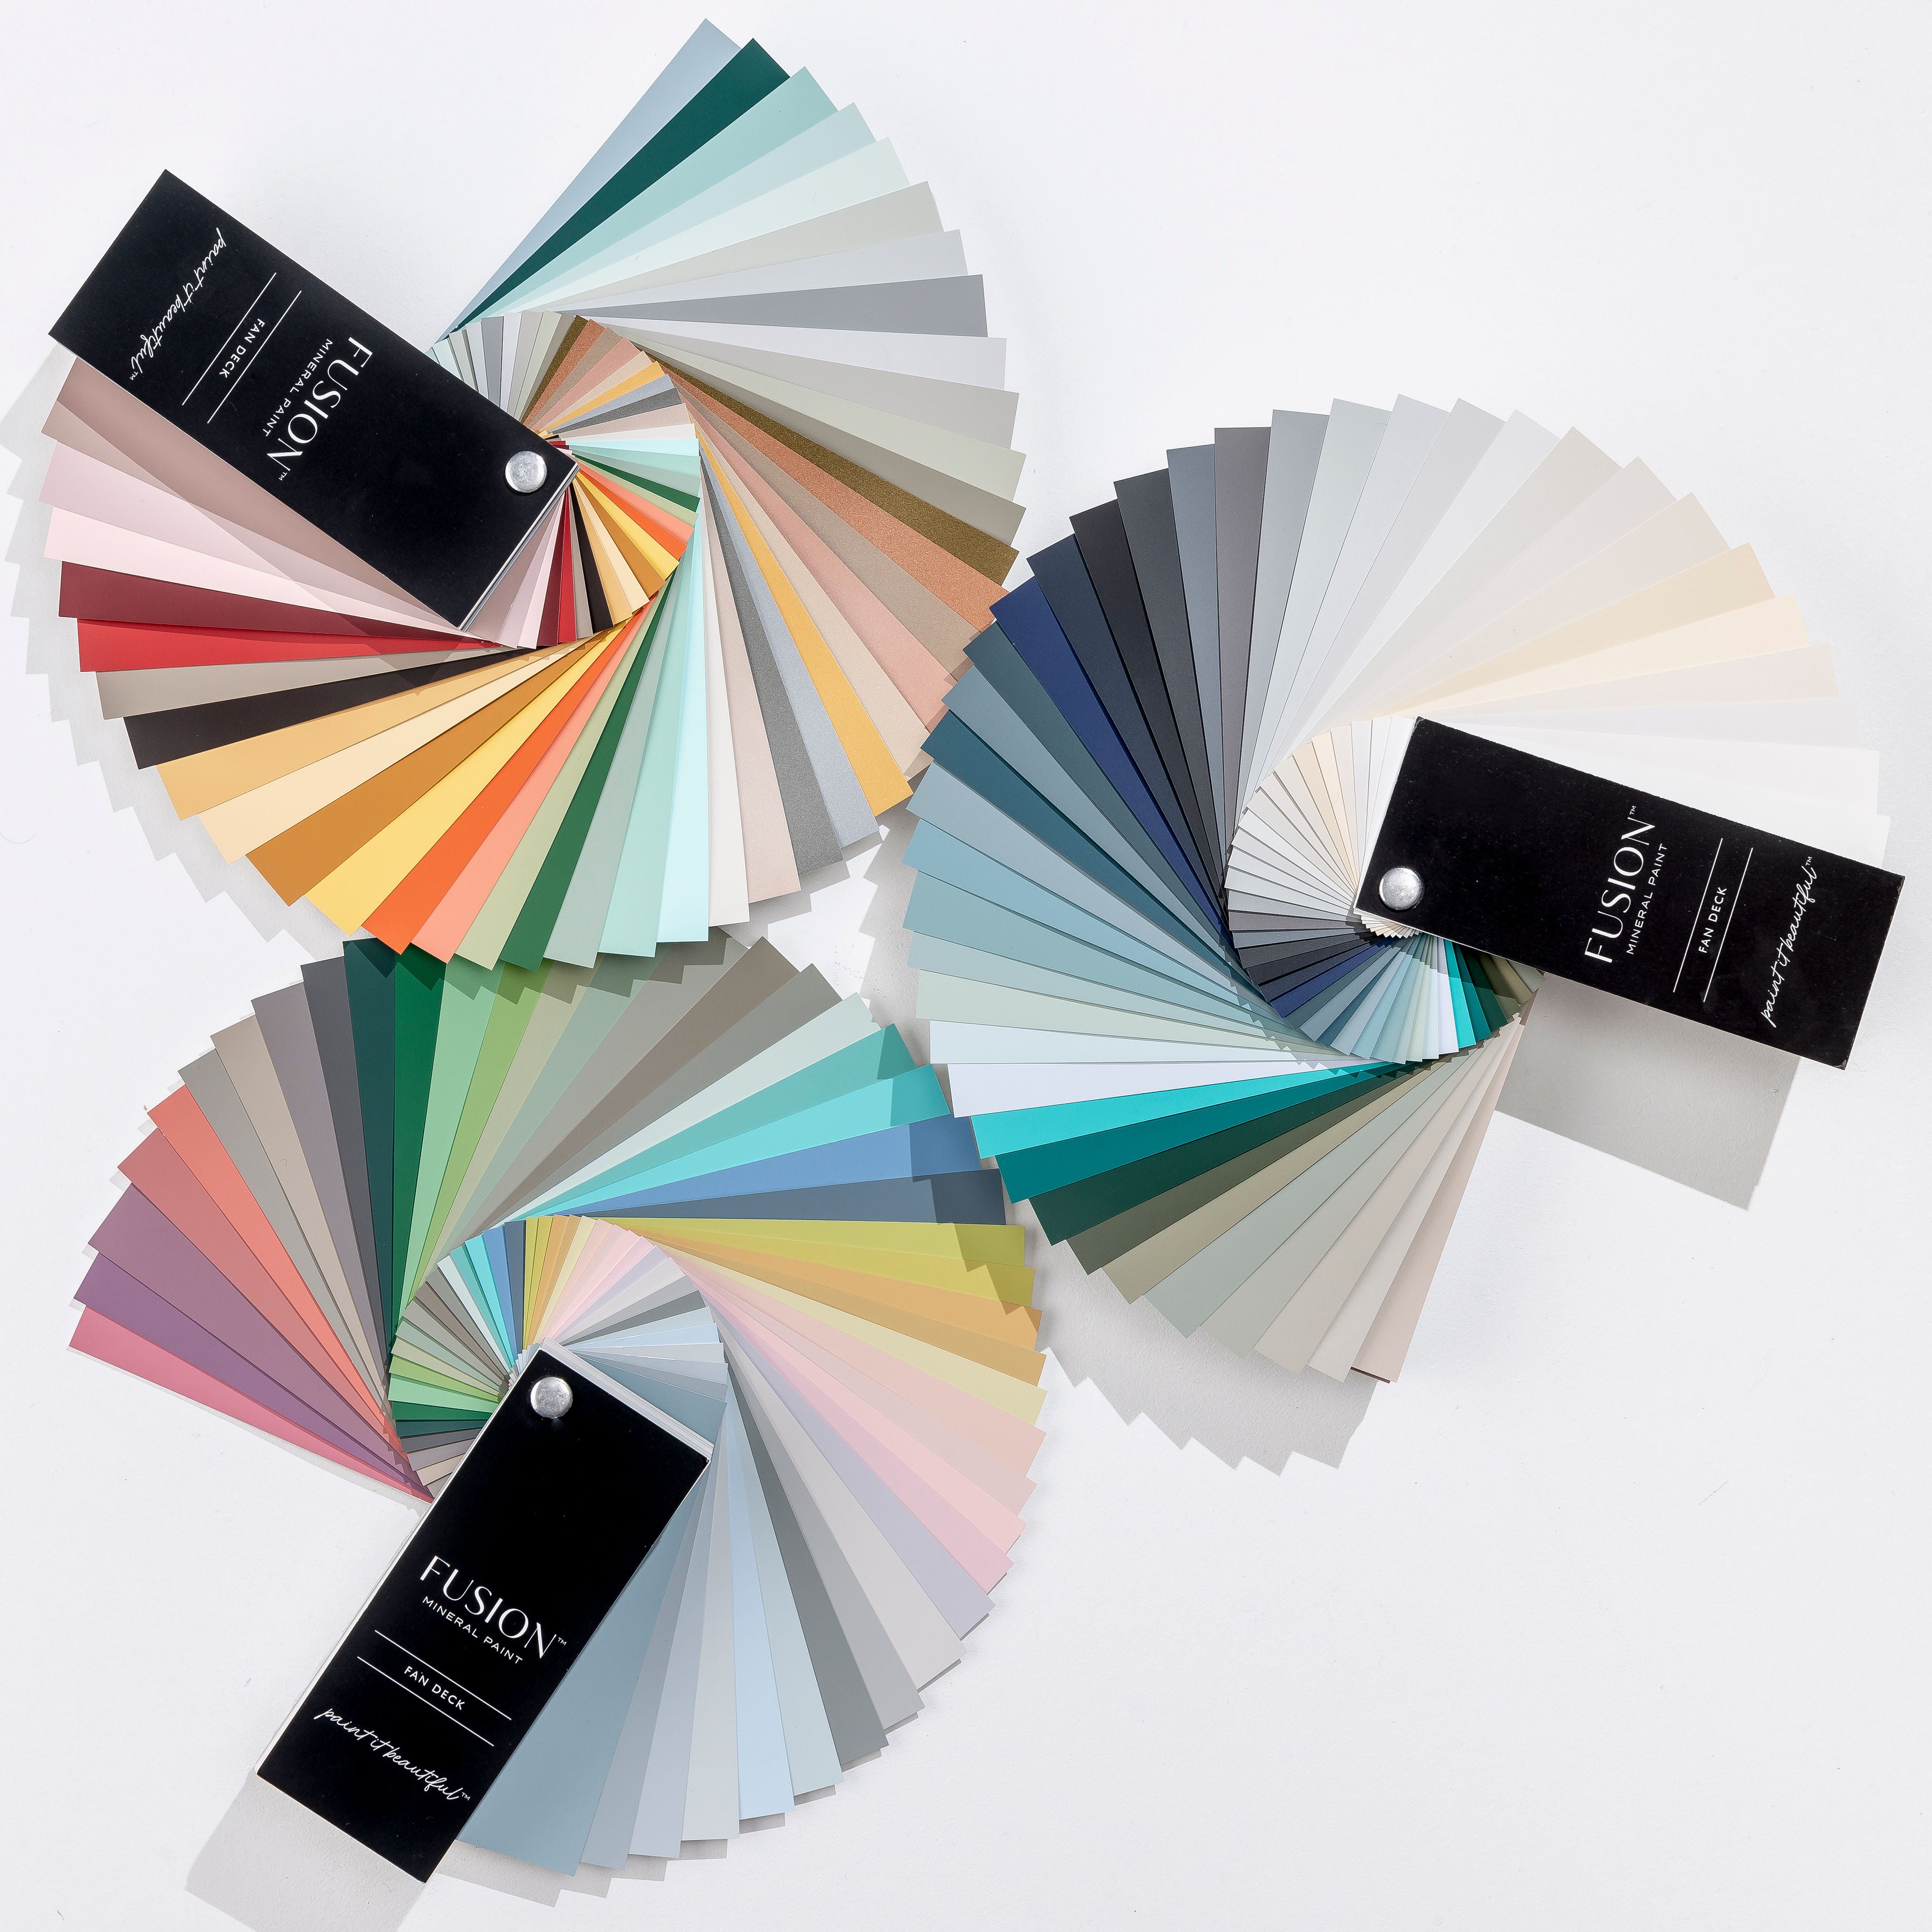 Fusion Mineral Paint Collection available at Home Smith